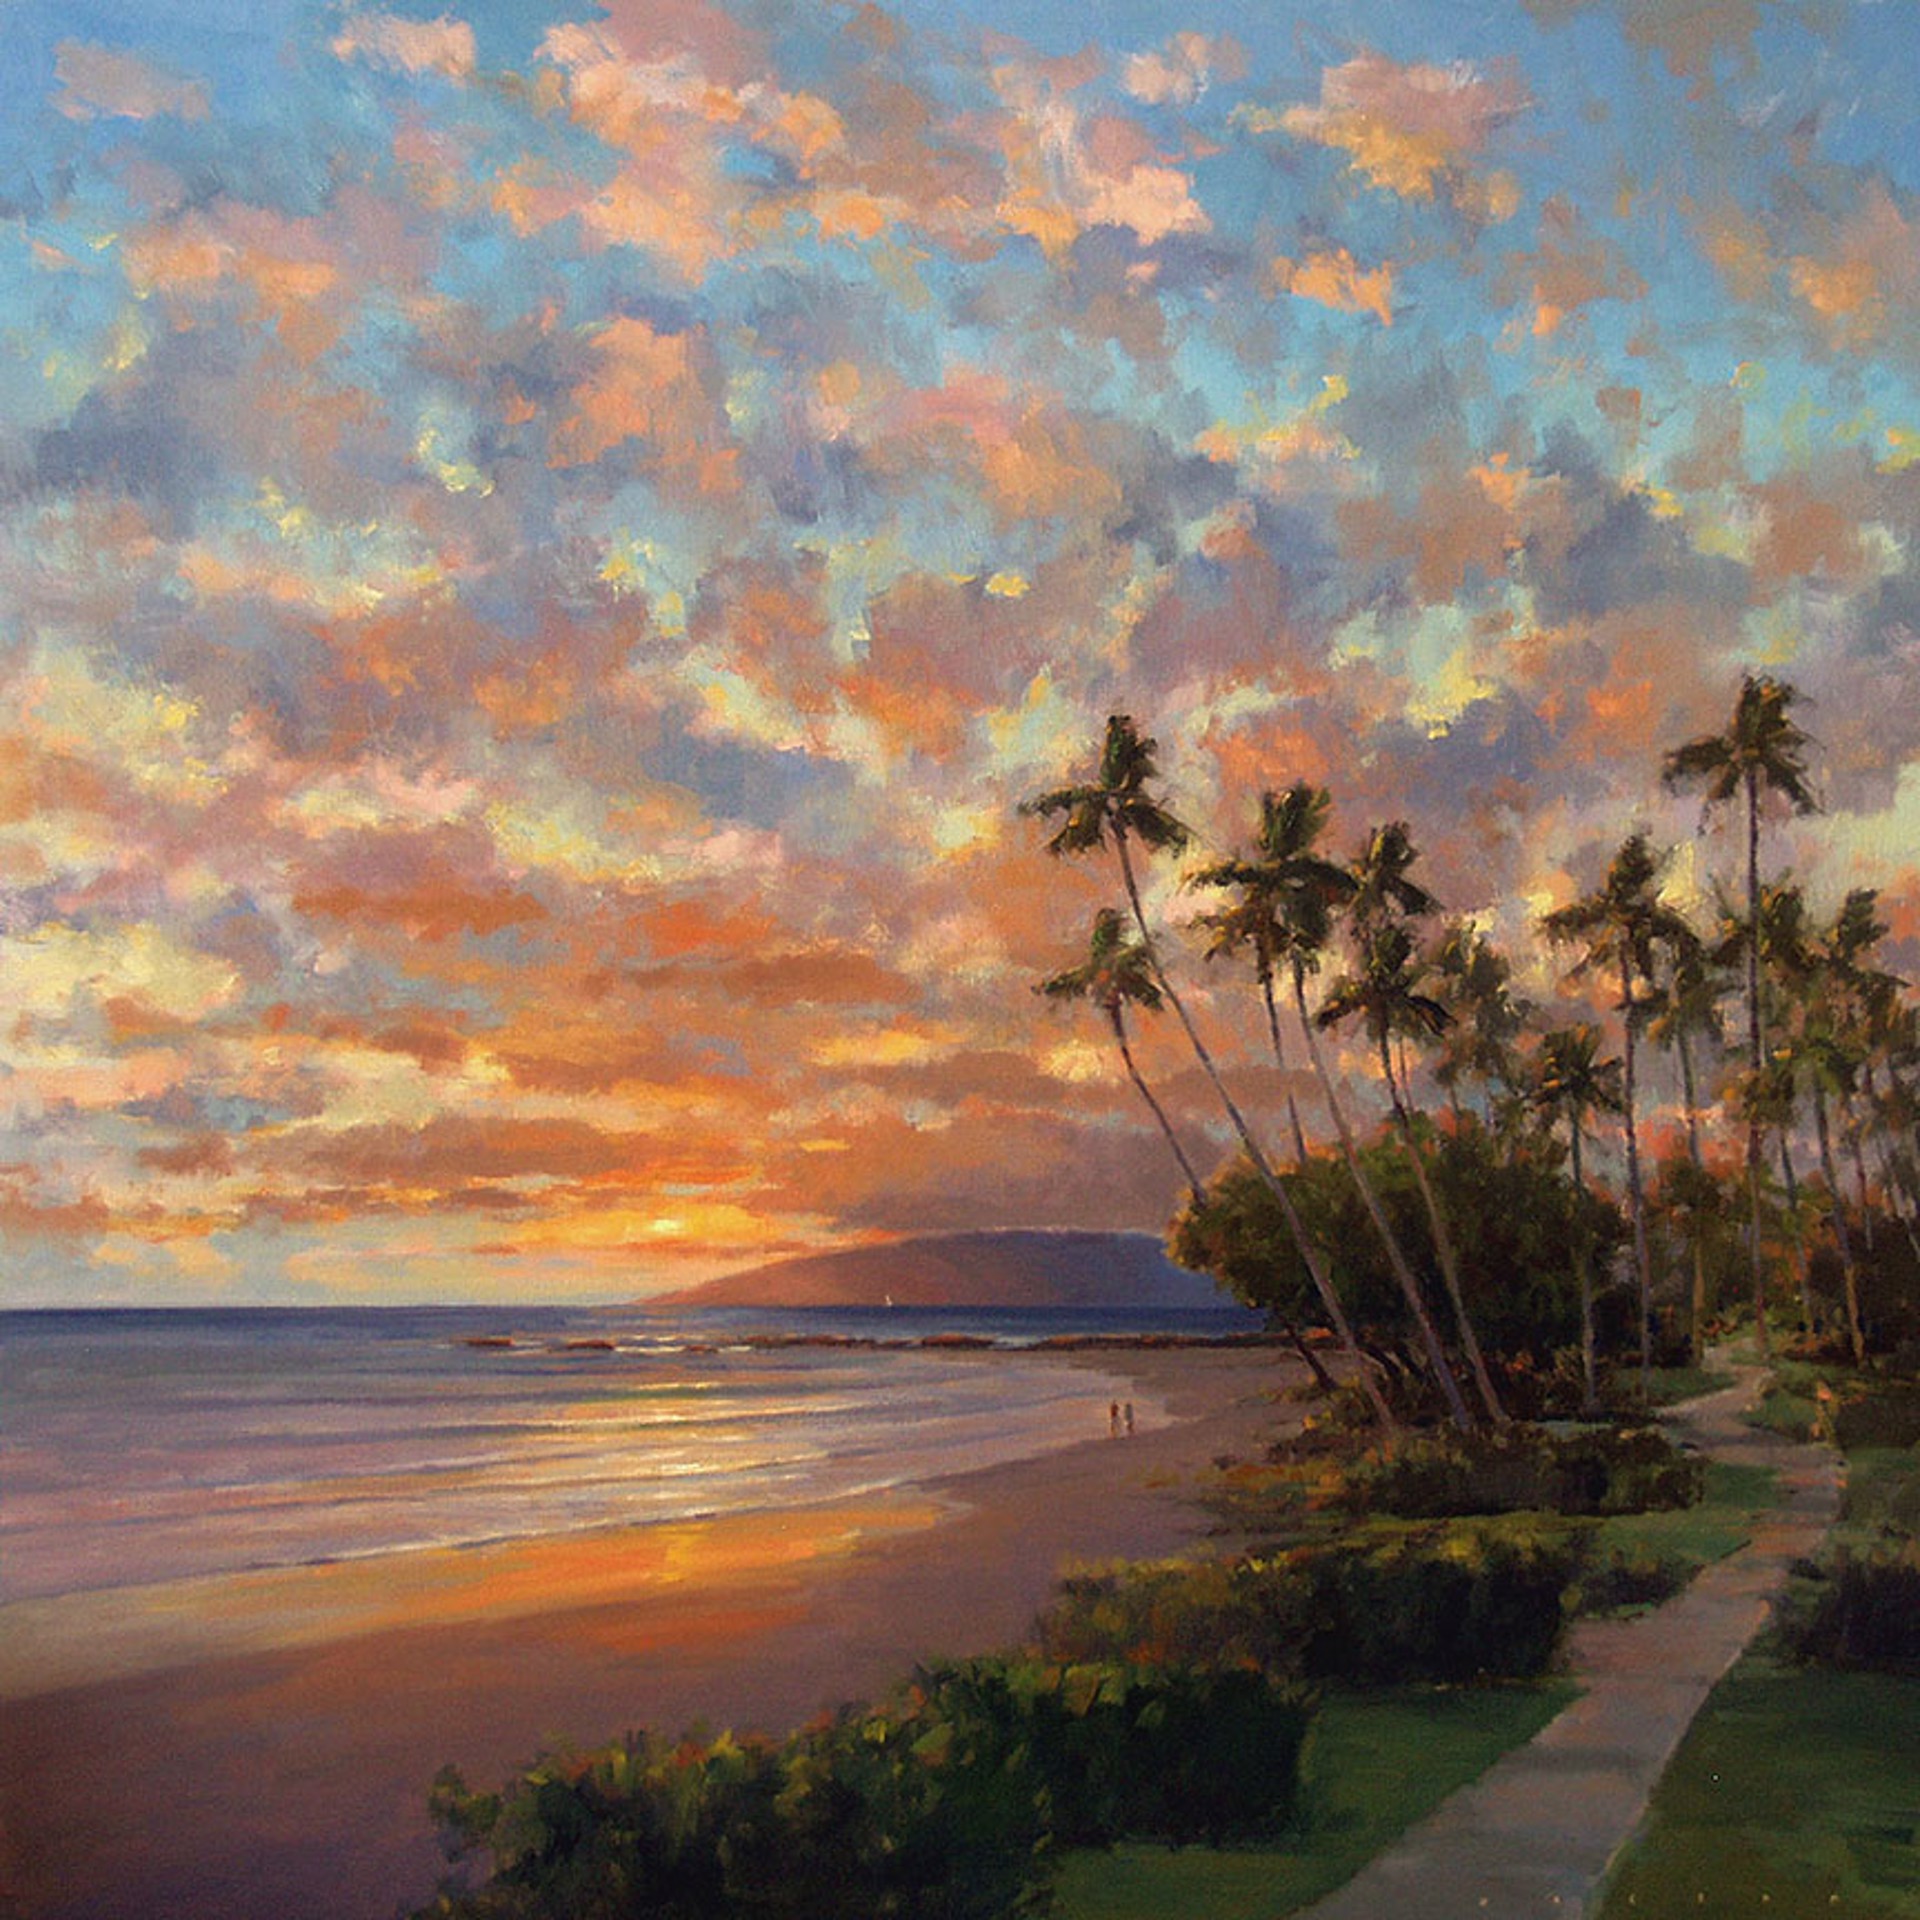 Keawakapu Sunset - SOLD by Commission Possibilities / Previously Sold ZX